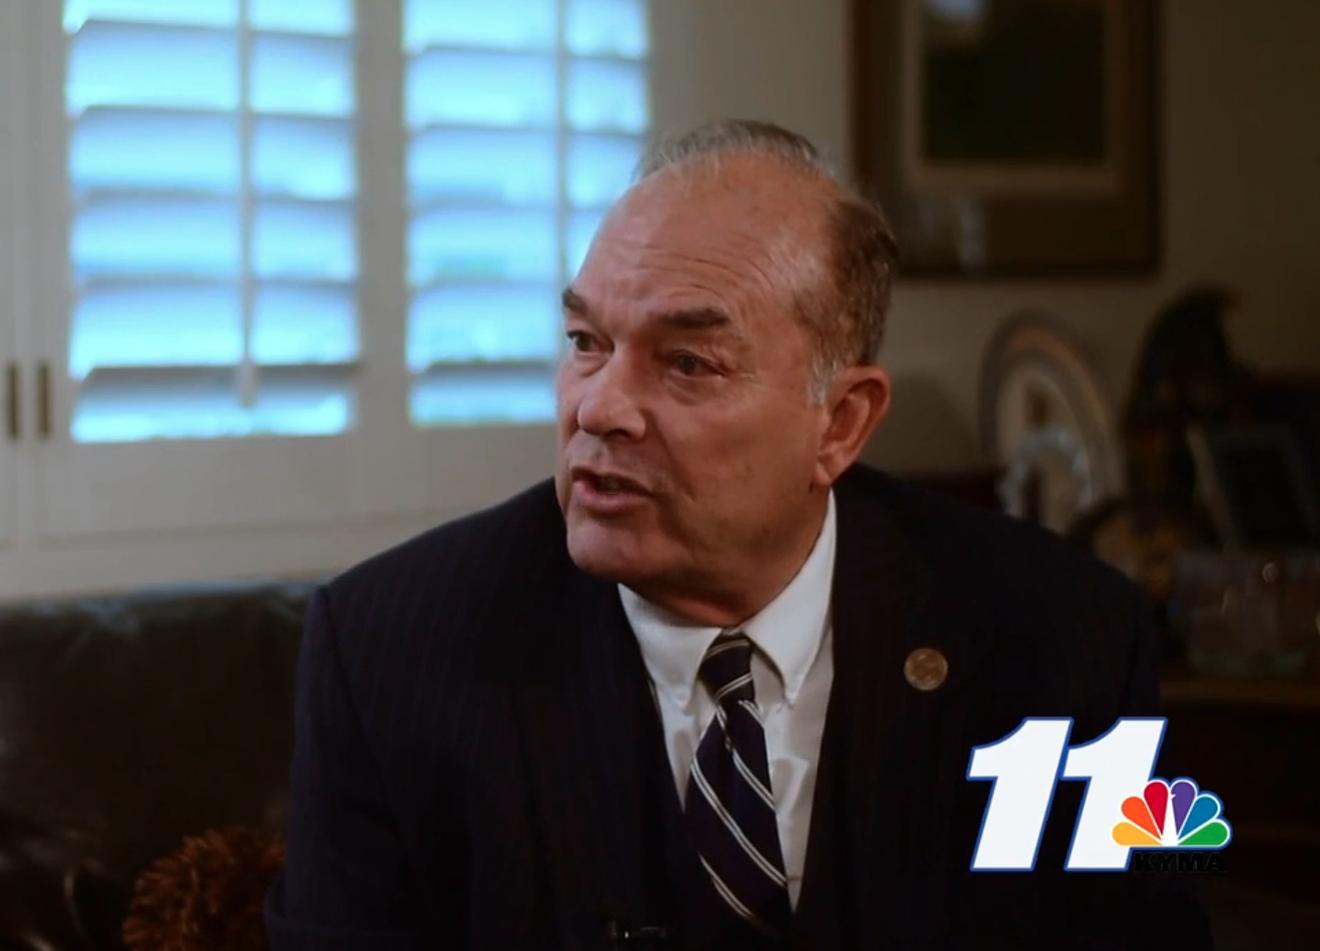 Former state representative Don Shooter spoke with Yuma's KYMA-News 11 for a bizarre interview in which Shooter pushed back on accusations of his sexual harassment at the Capitol.